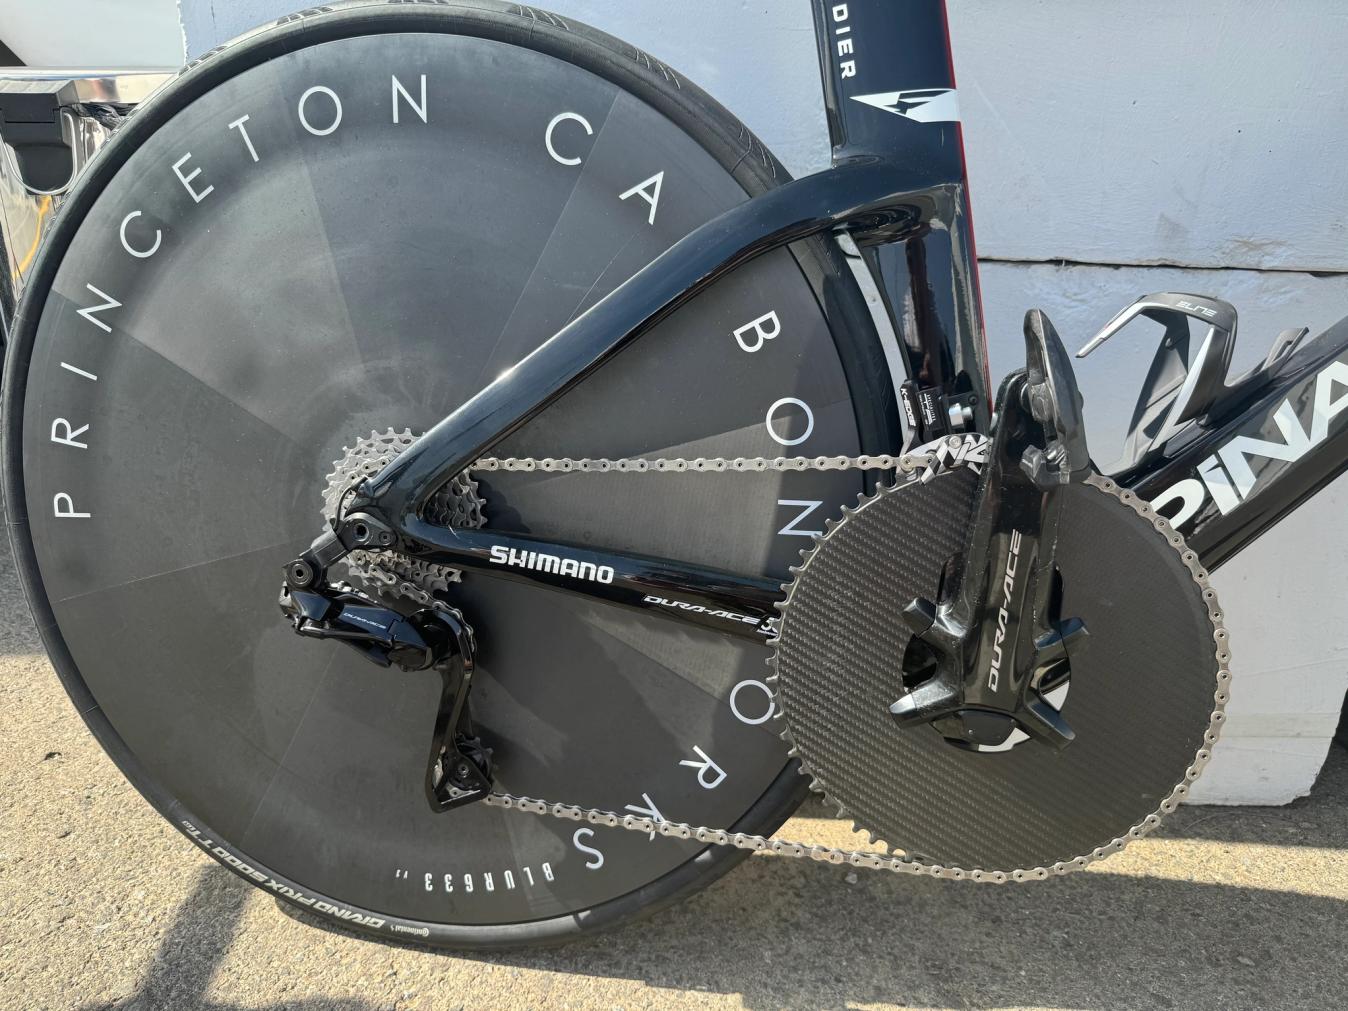 By our count Swift is using a 66t chainring